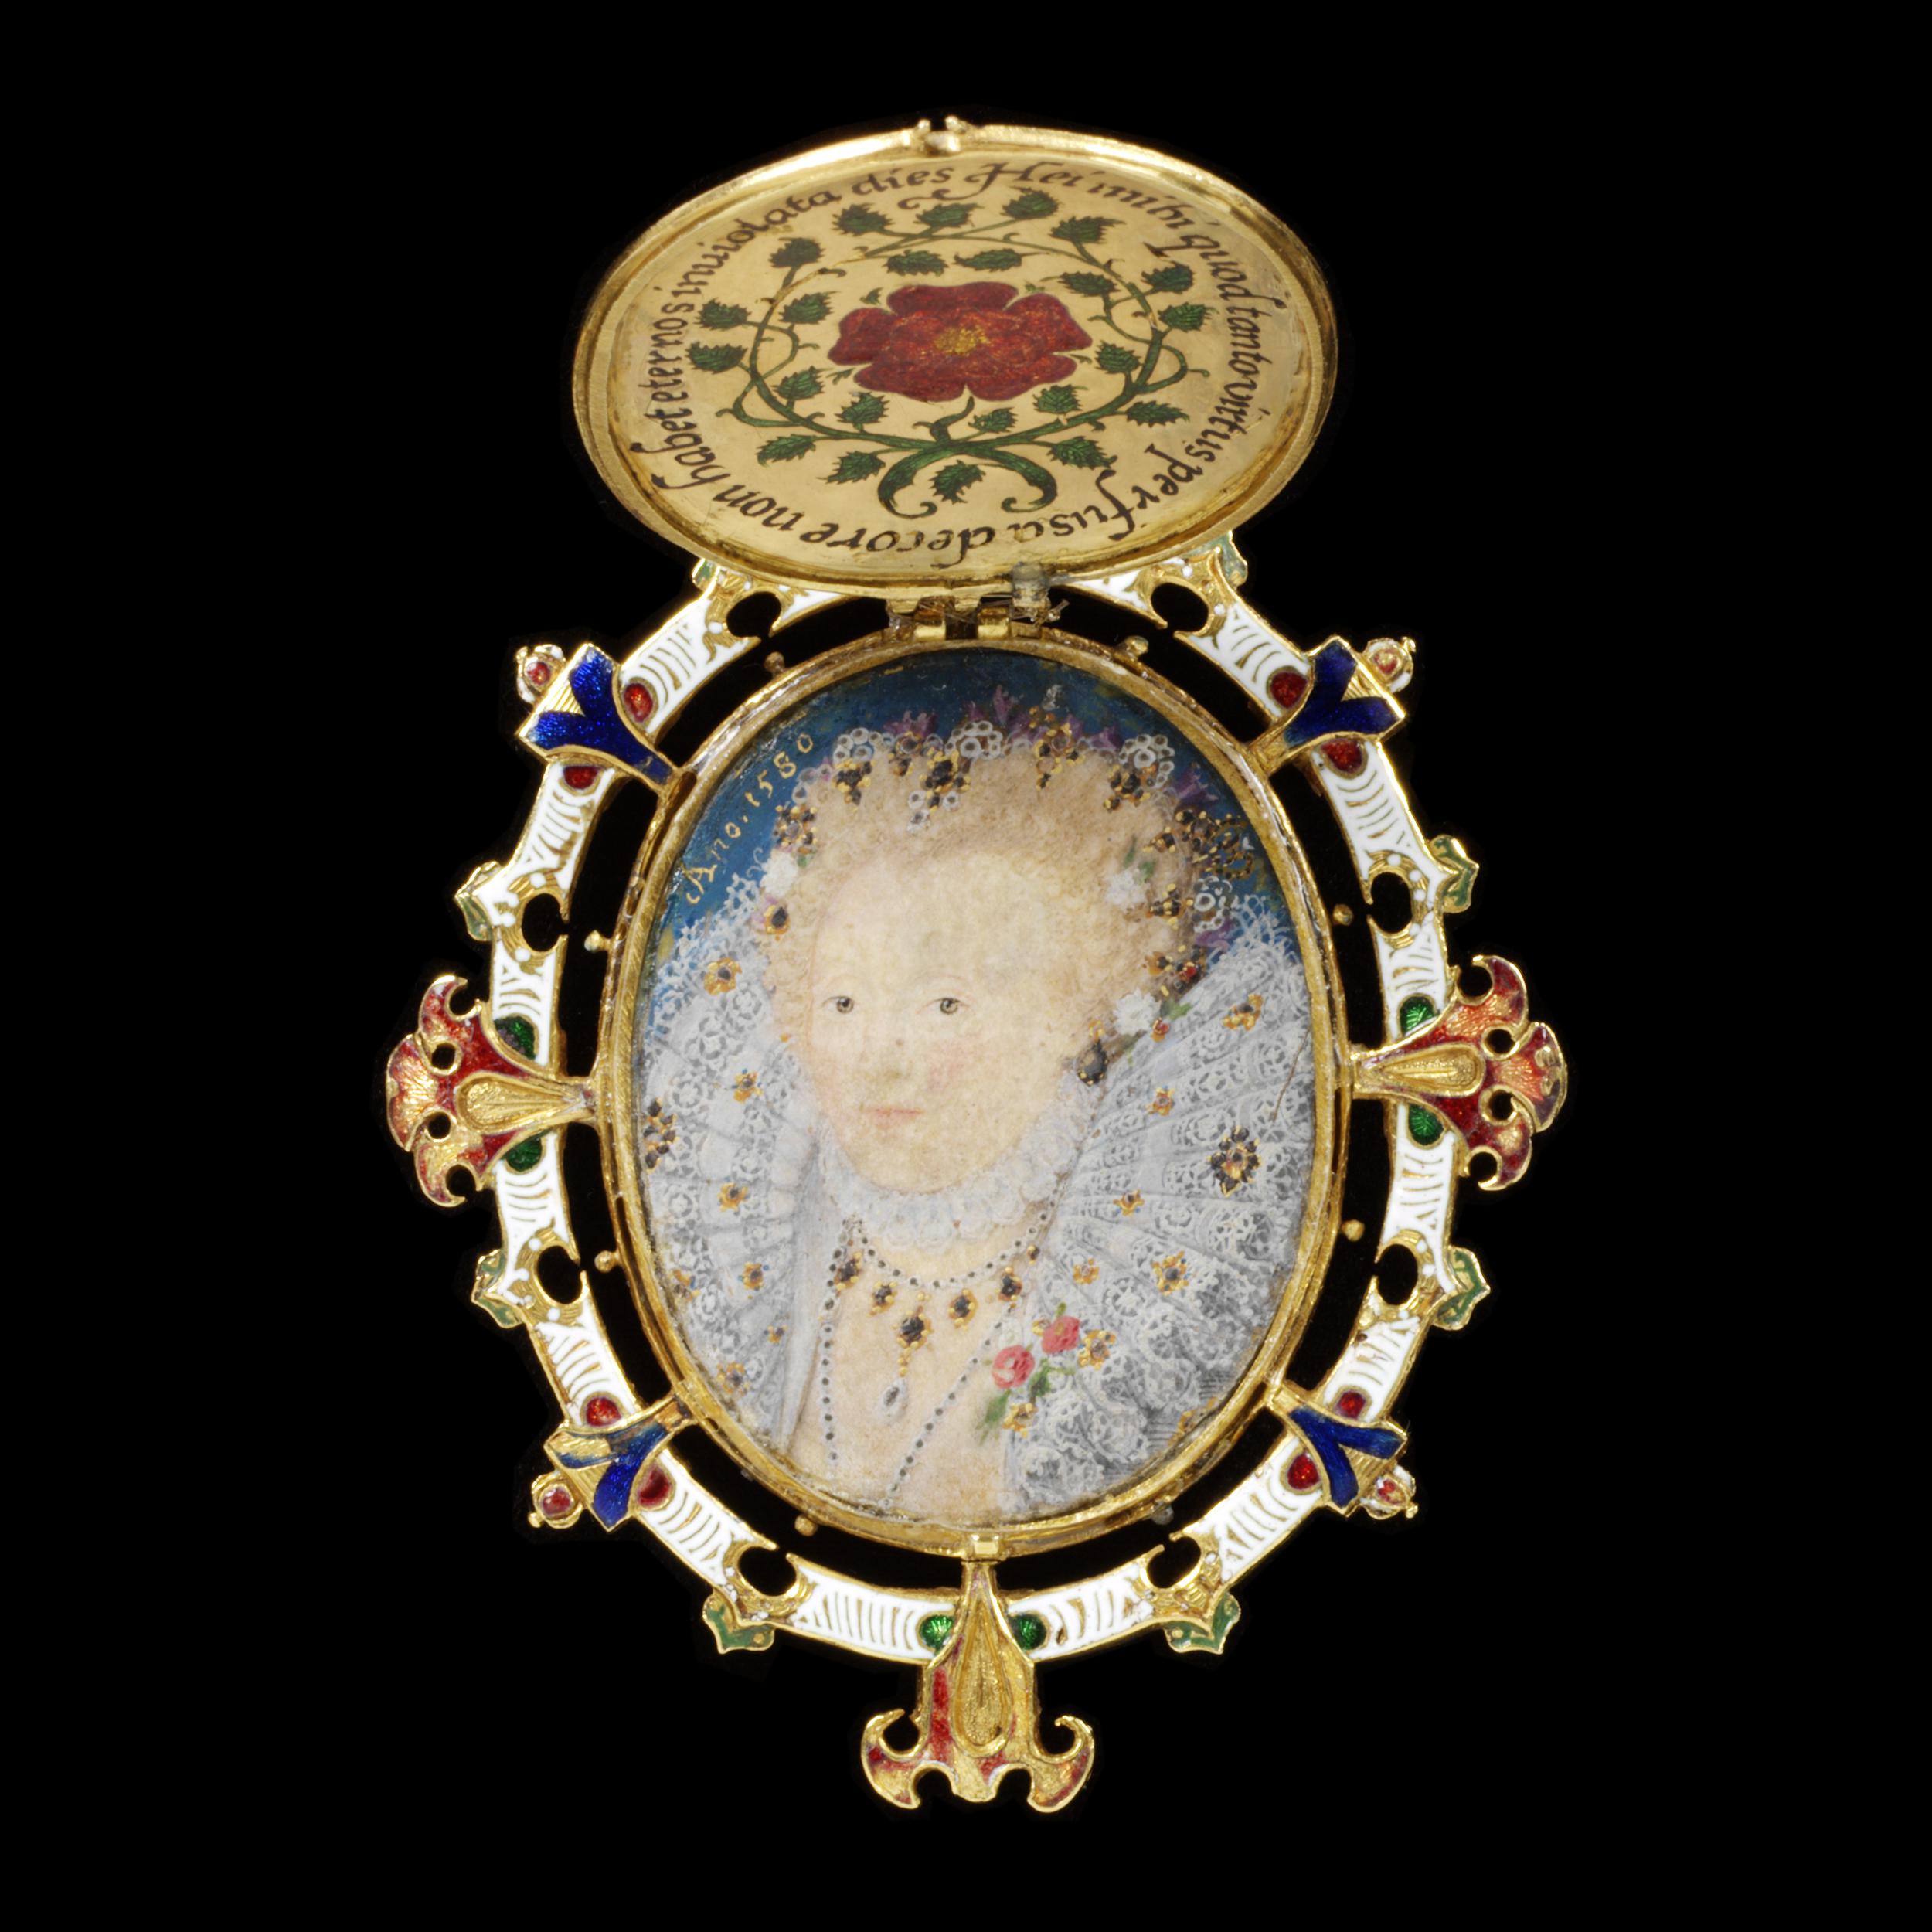 Nicholas Hilliard (British, Exeter circa 1547–1619 London), ‘Heneage (or Armada) Jewel,’ circa 1595–1600. Enameled gold, table-cut diamonds, Burmese rubies, rock crystal and a miniature on vellum. 2 3/4 by 2in. (7 by 5.1cm). Victoria and Albert Museum. Image © Victoria and Albert Museum, London